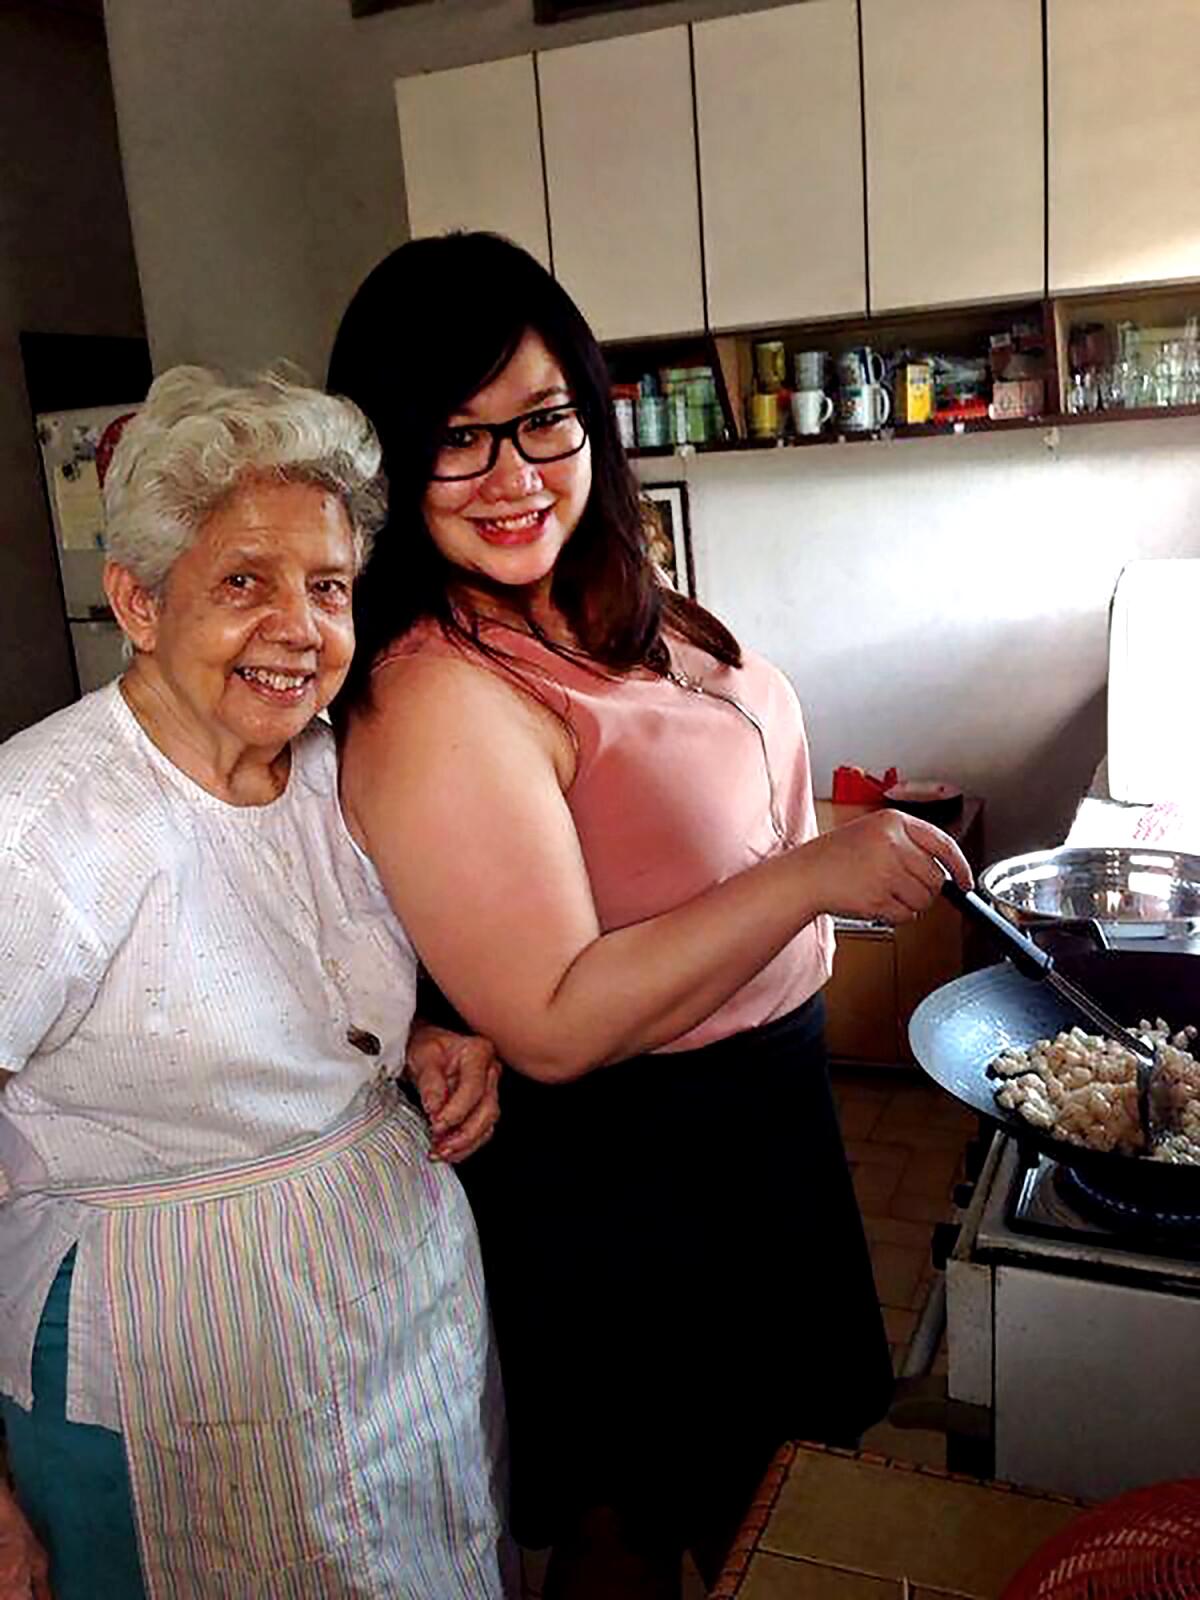 A woman standing by a stove with her grandmother, smiling.